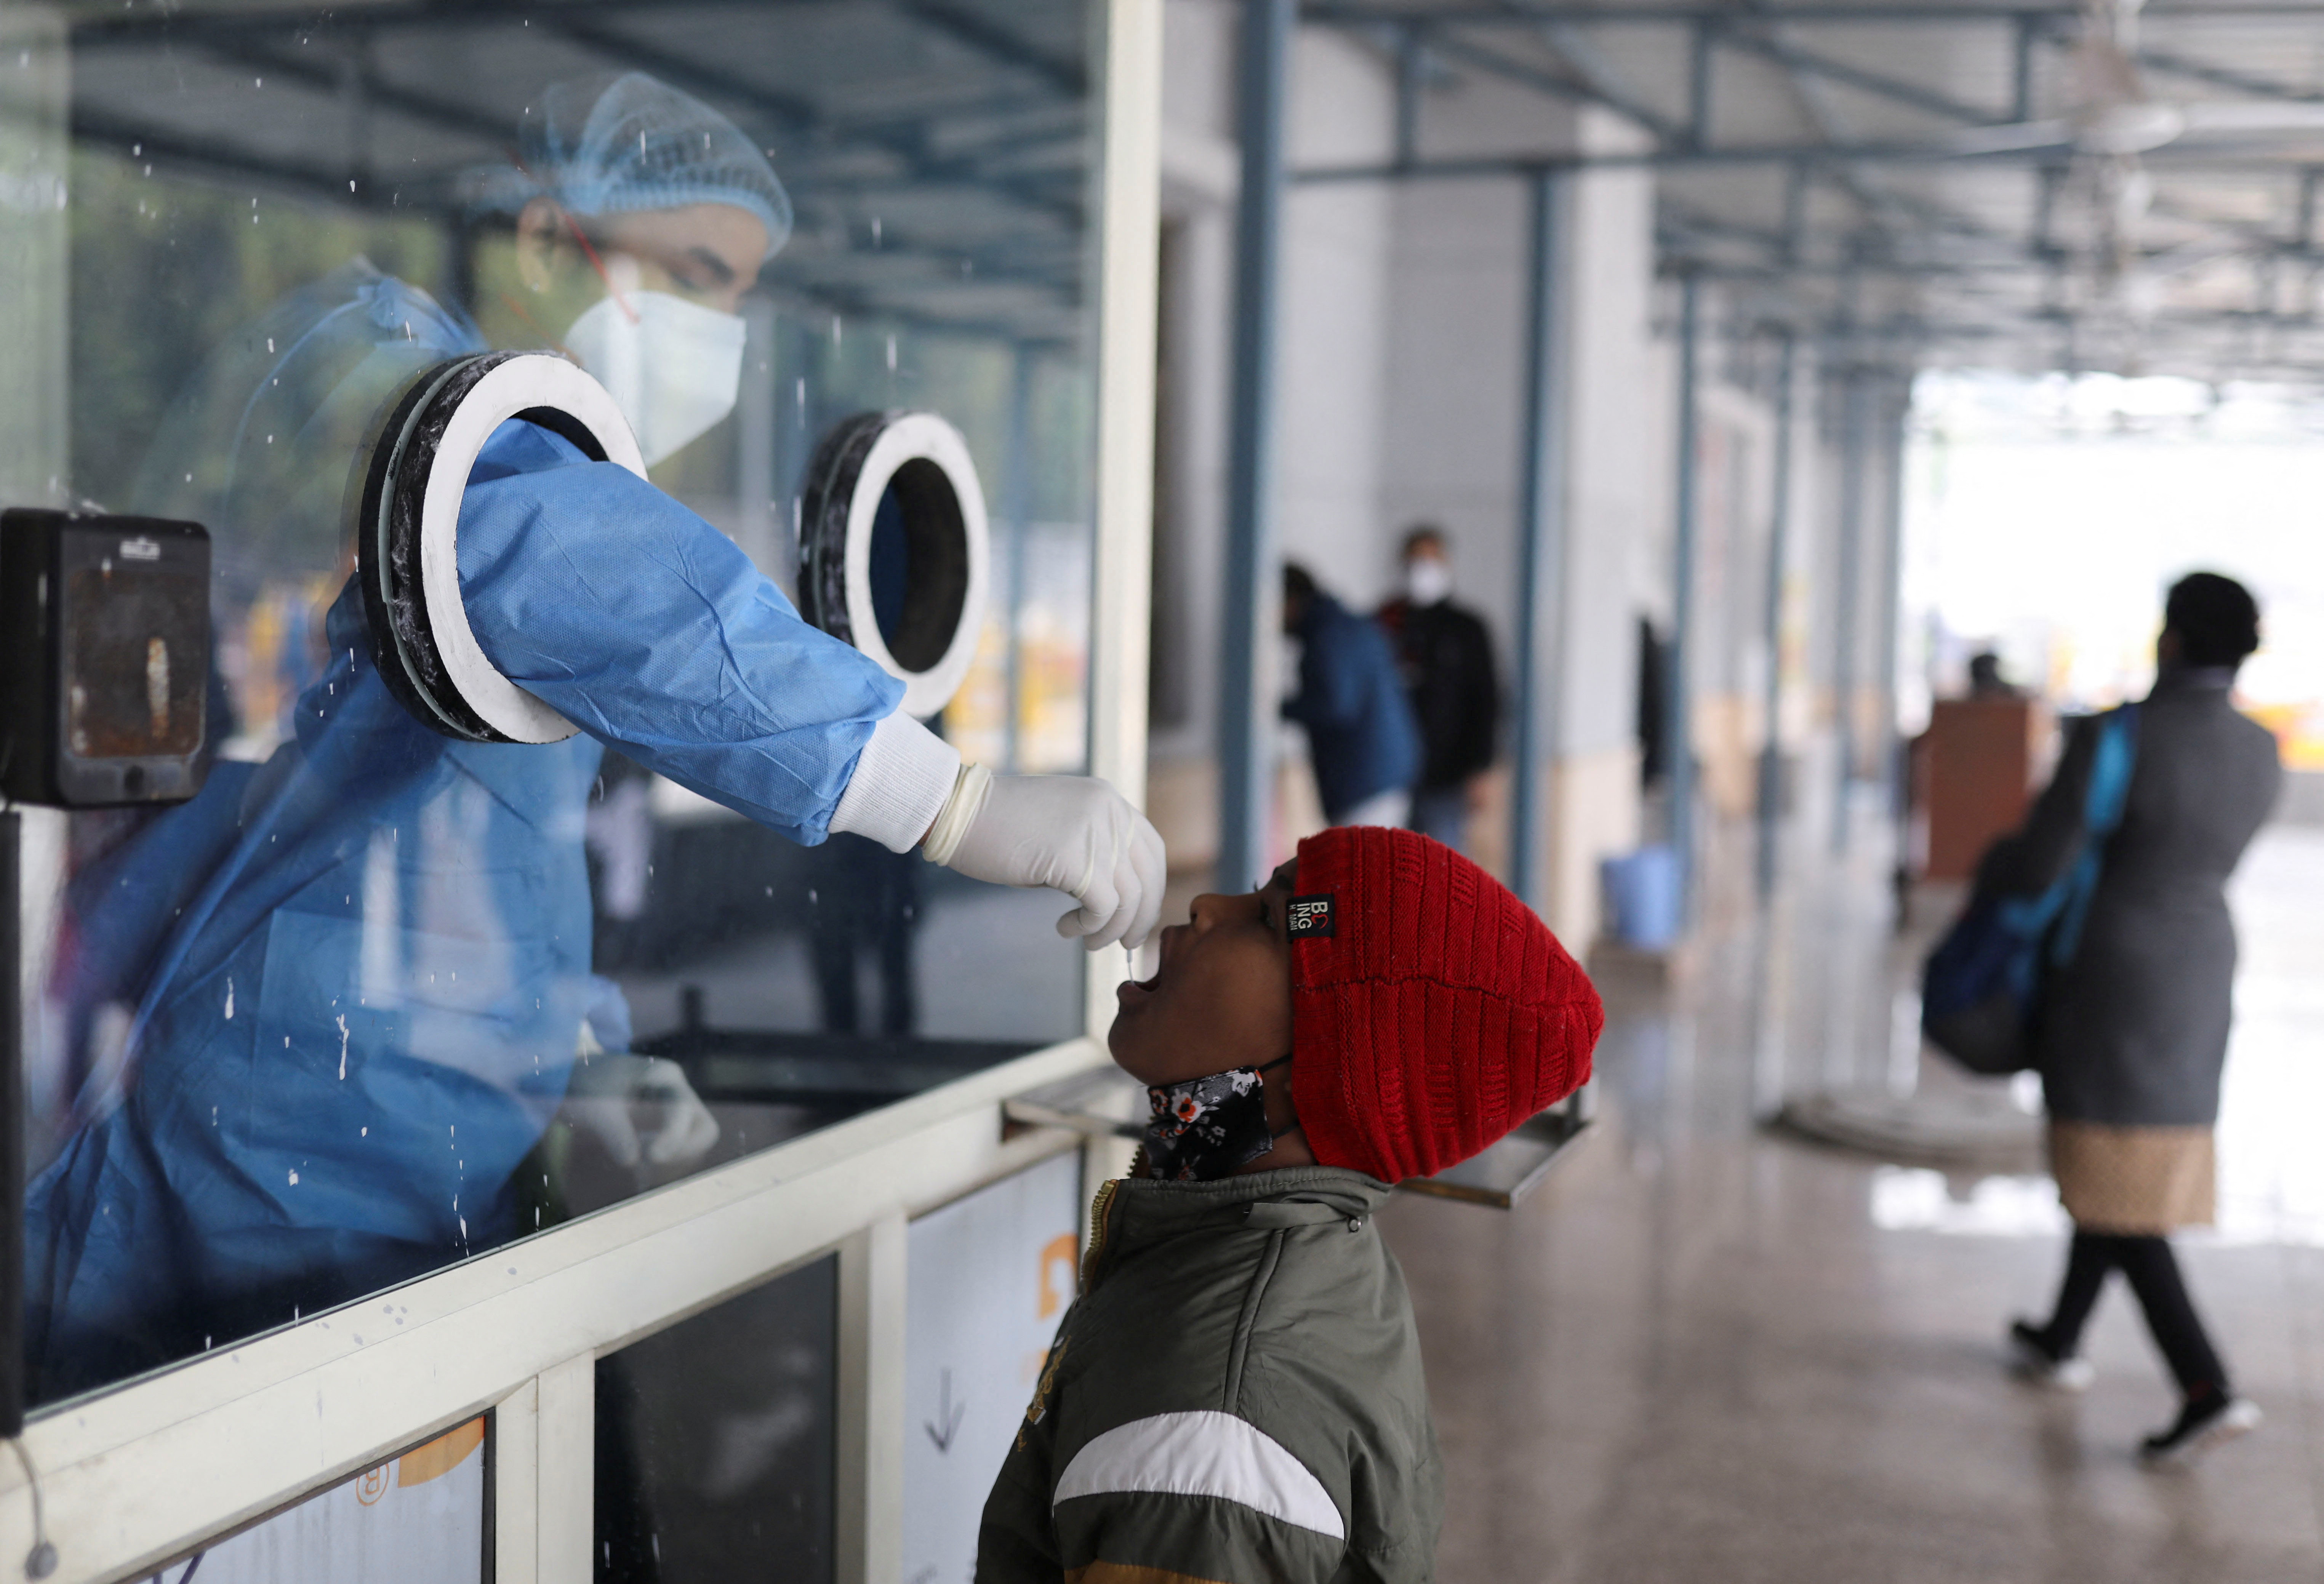 A healthcare worker collects a test swab sample from a child amidst the spread of the coronavirus disease (COVID-19), at a testing centre inside a hospital in New Delhi, India, January 14, 2022. REUTERS/Anushree Fadnavis